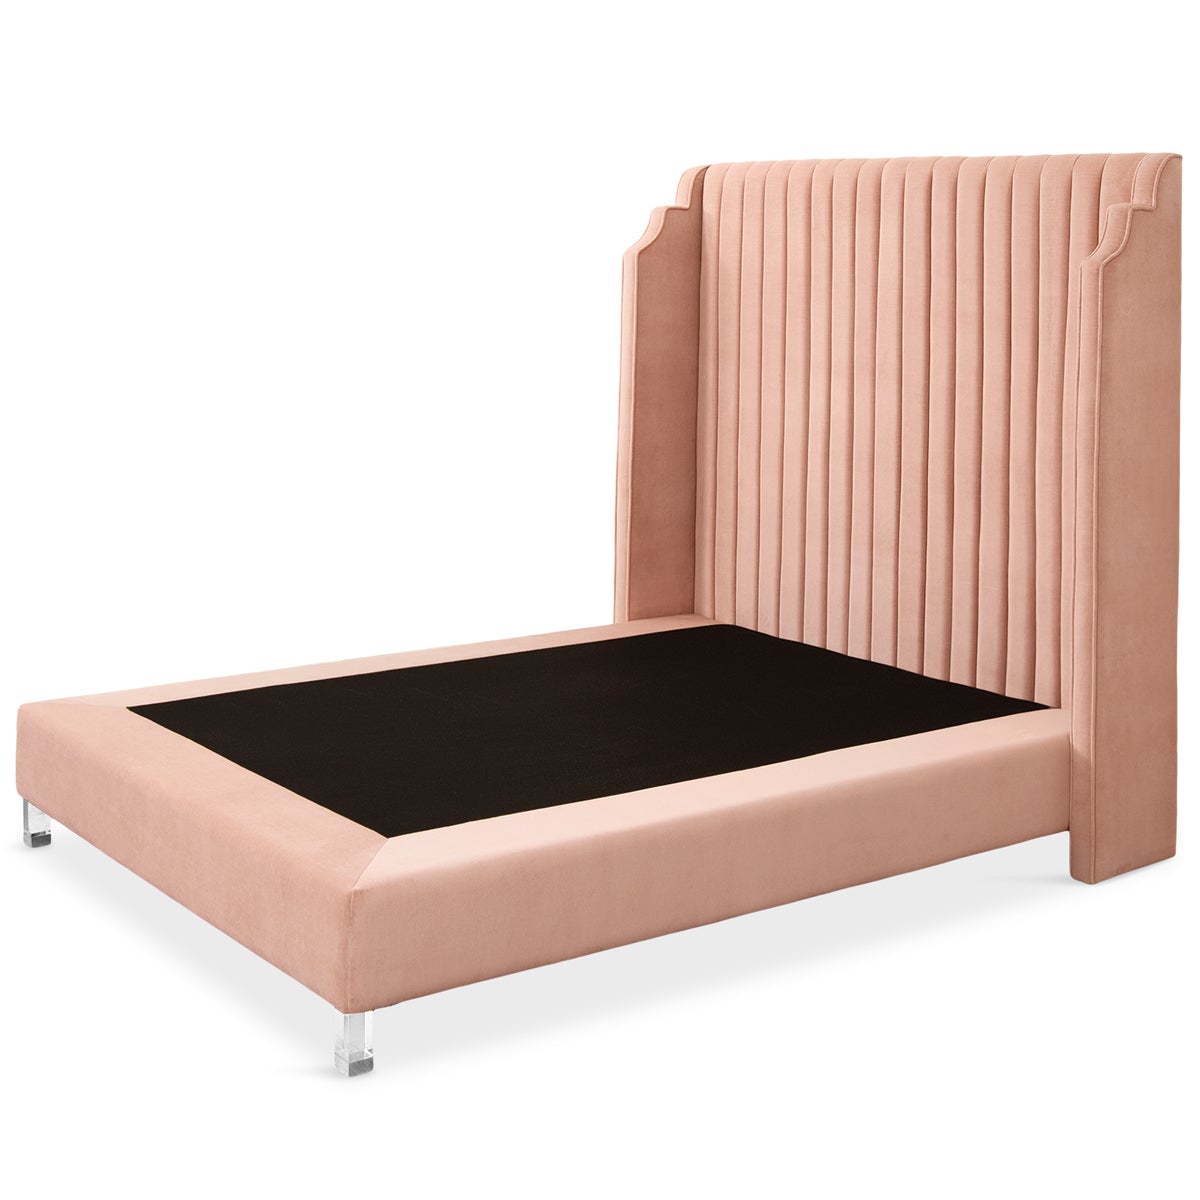 Tiffany Bed with Channel Tufting - ModShop1.com